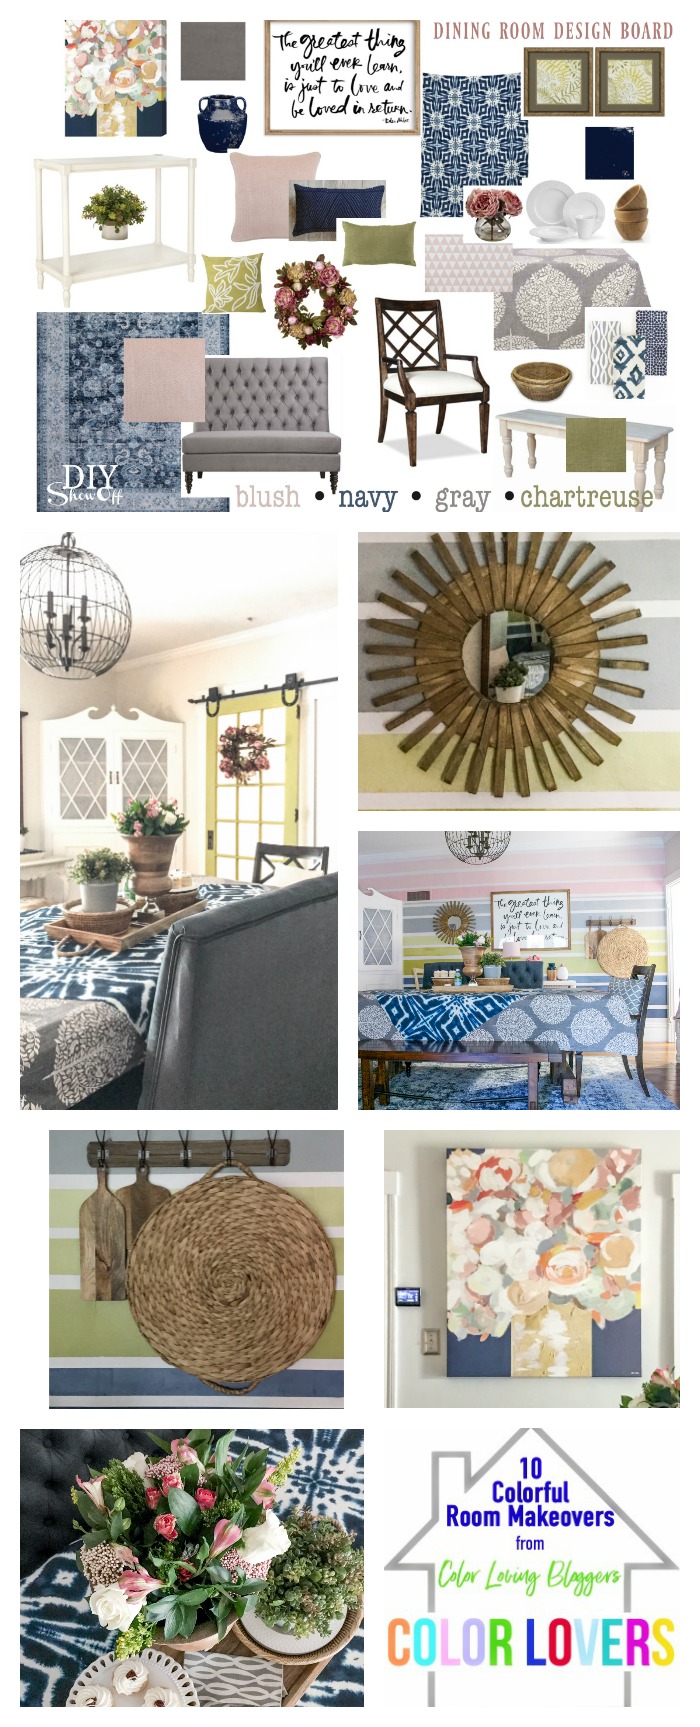 Color Lover's Room Makeover - dining room reveal @diyshowoff (navy, chartreuse, blush and gray for a soft but colorful fresh new look) #colorlovers #birchlanecolorlovers #TheMinecolorlovers #mintedcolorlovers 